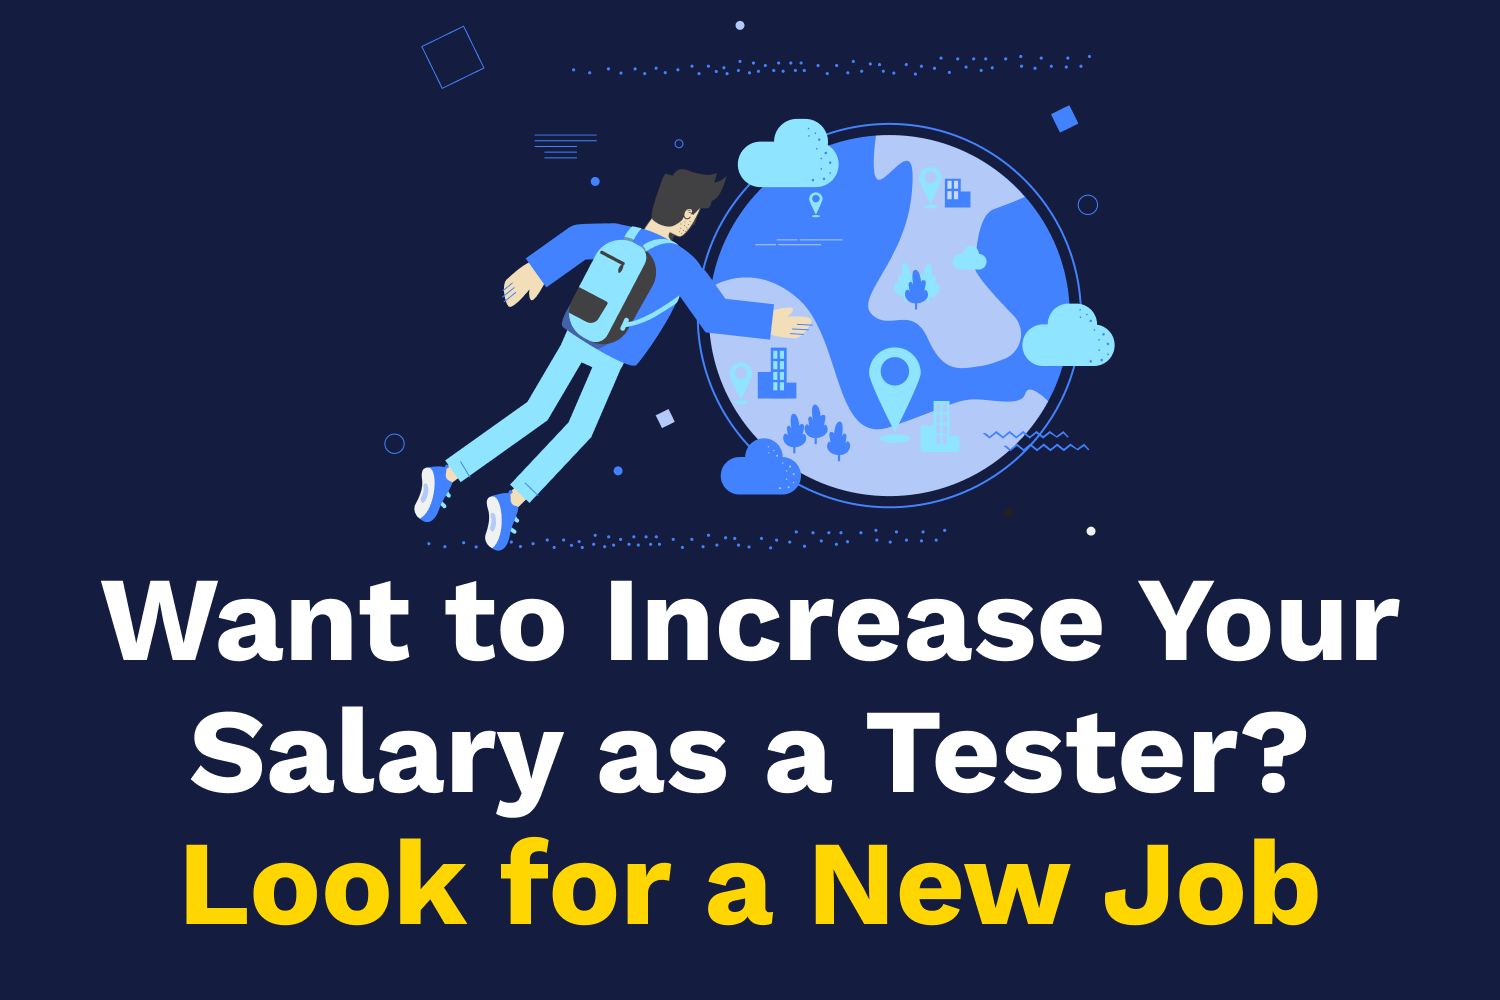 Want to Increase Your Salary as a Tester? Look for a New Job